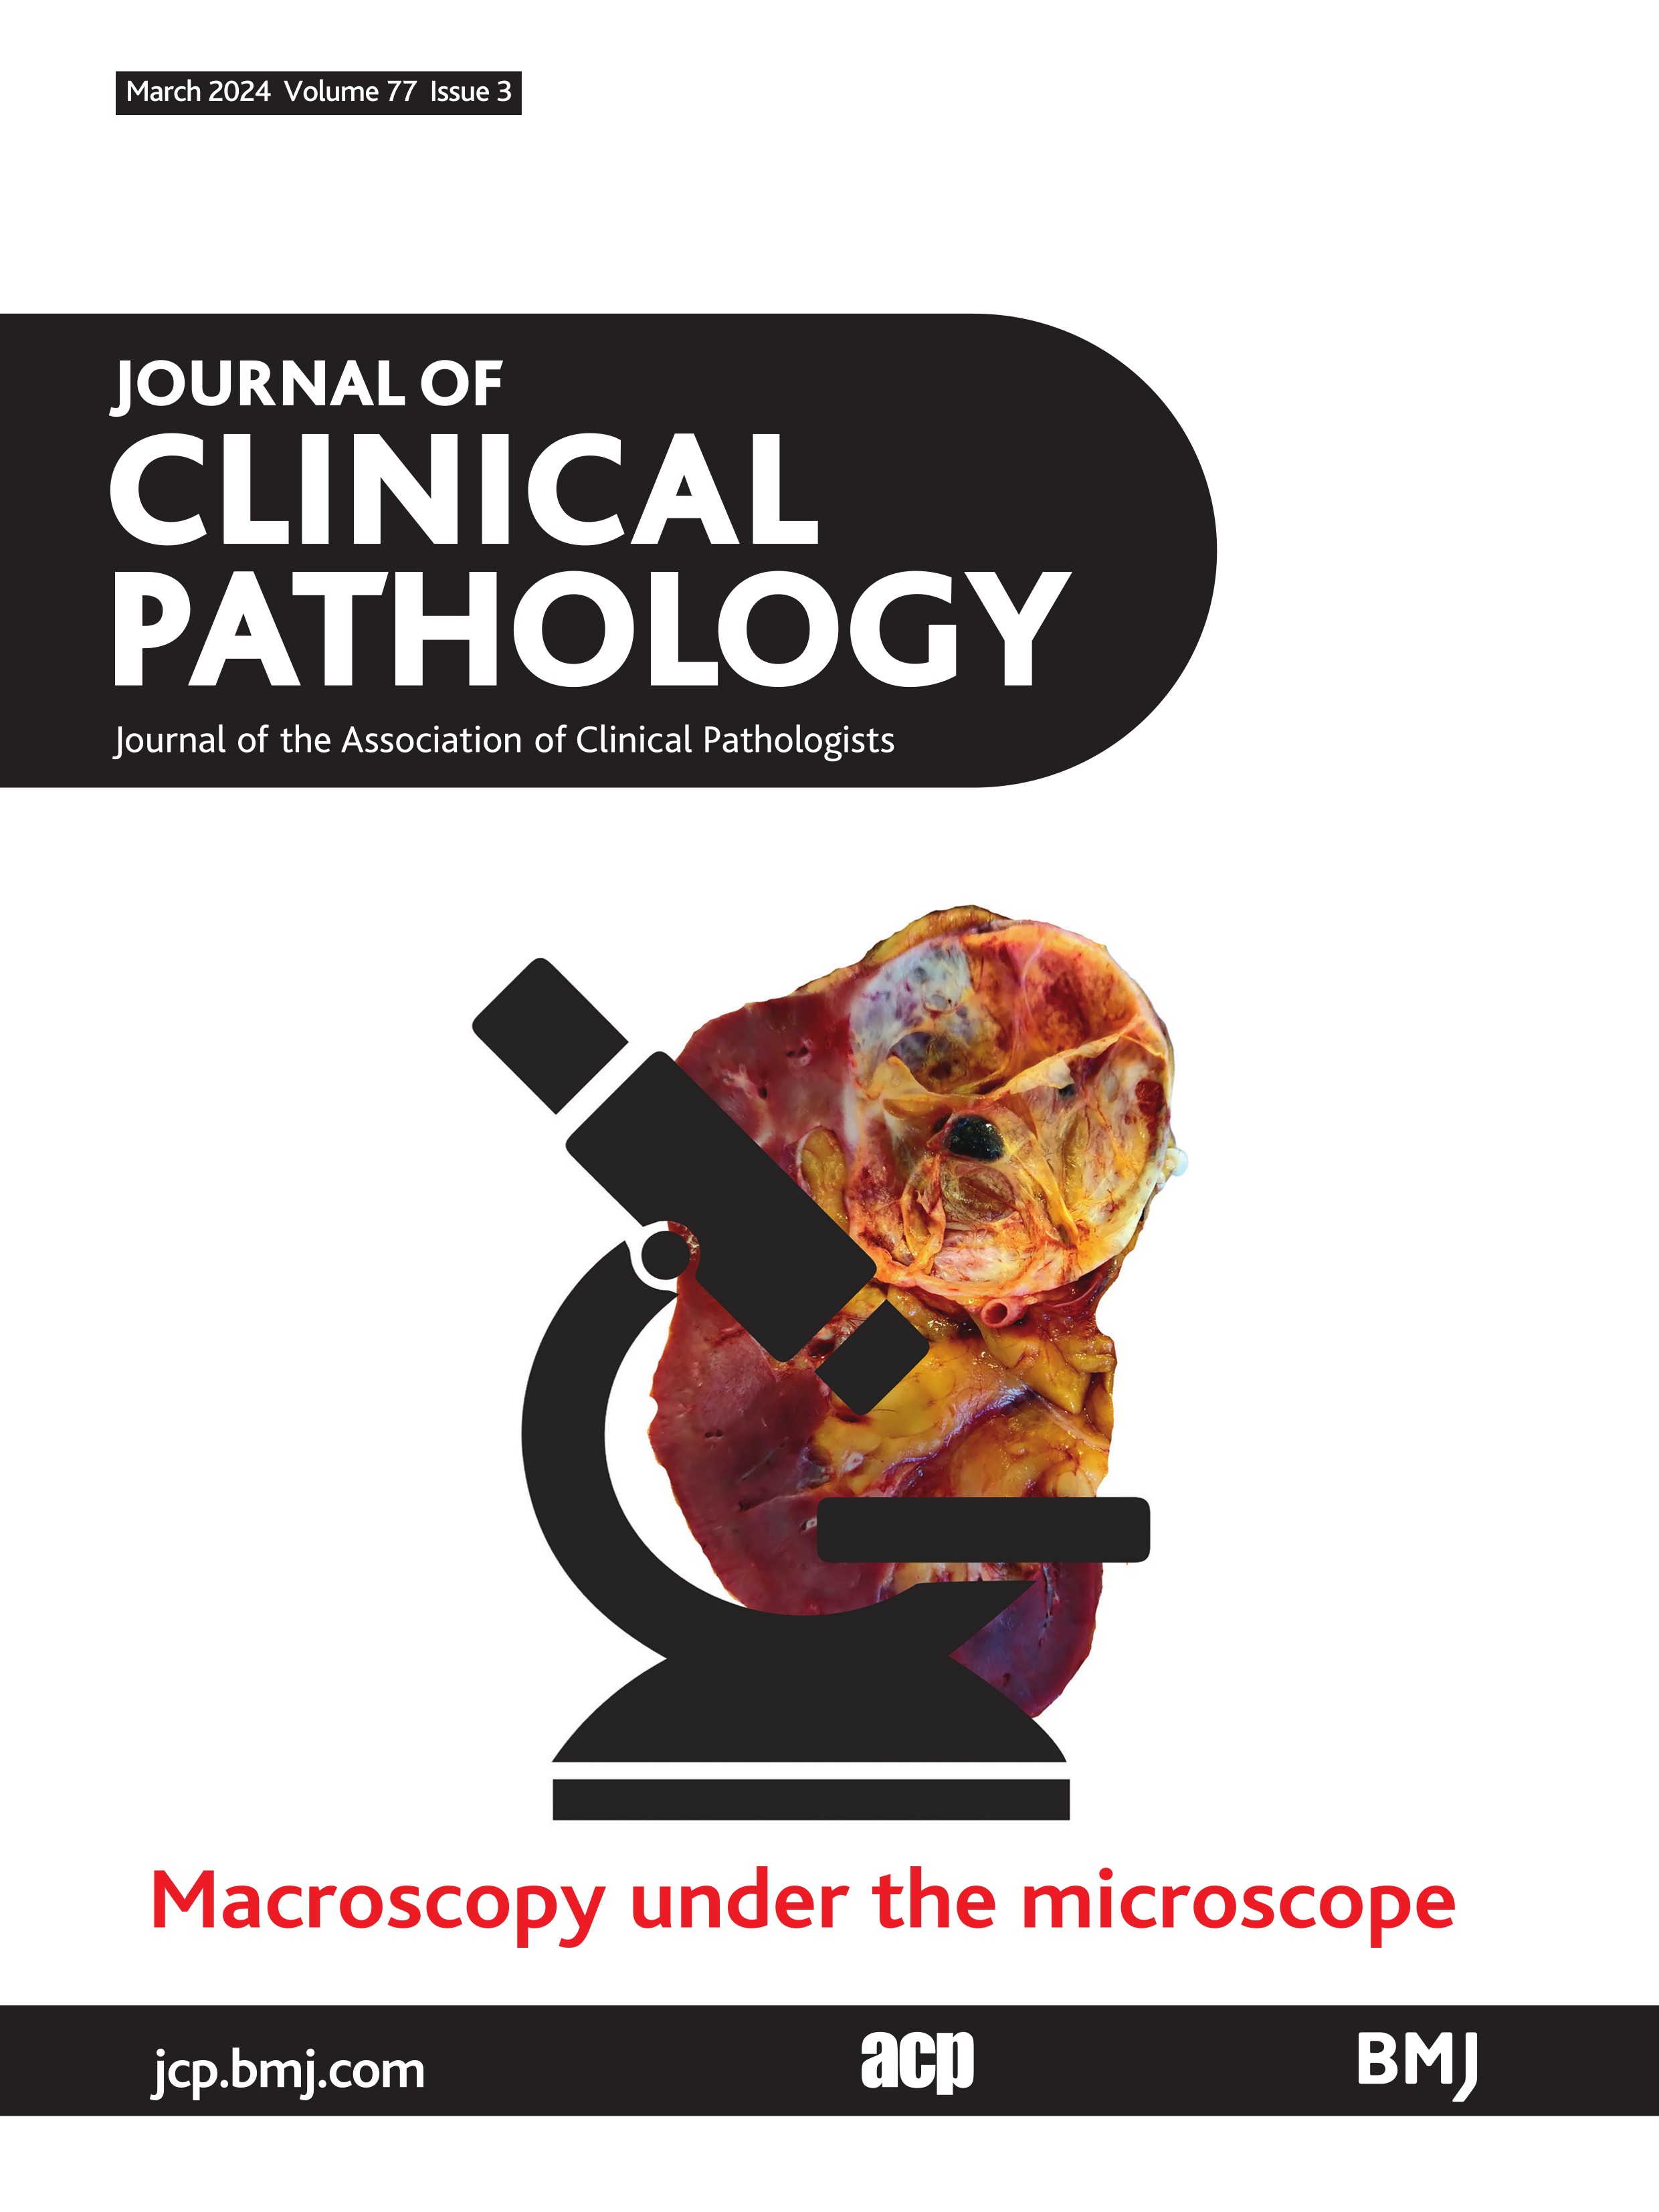 Macroscopic examination of gynaecological specimens: a critial and often underemphasised aspect of pathological reporting